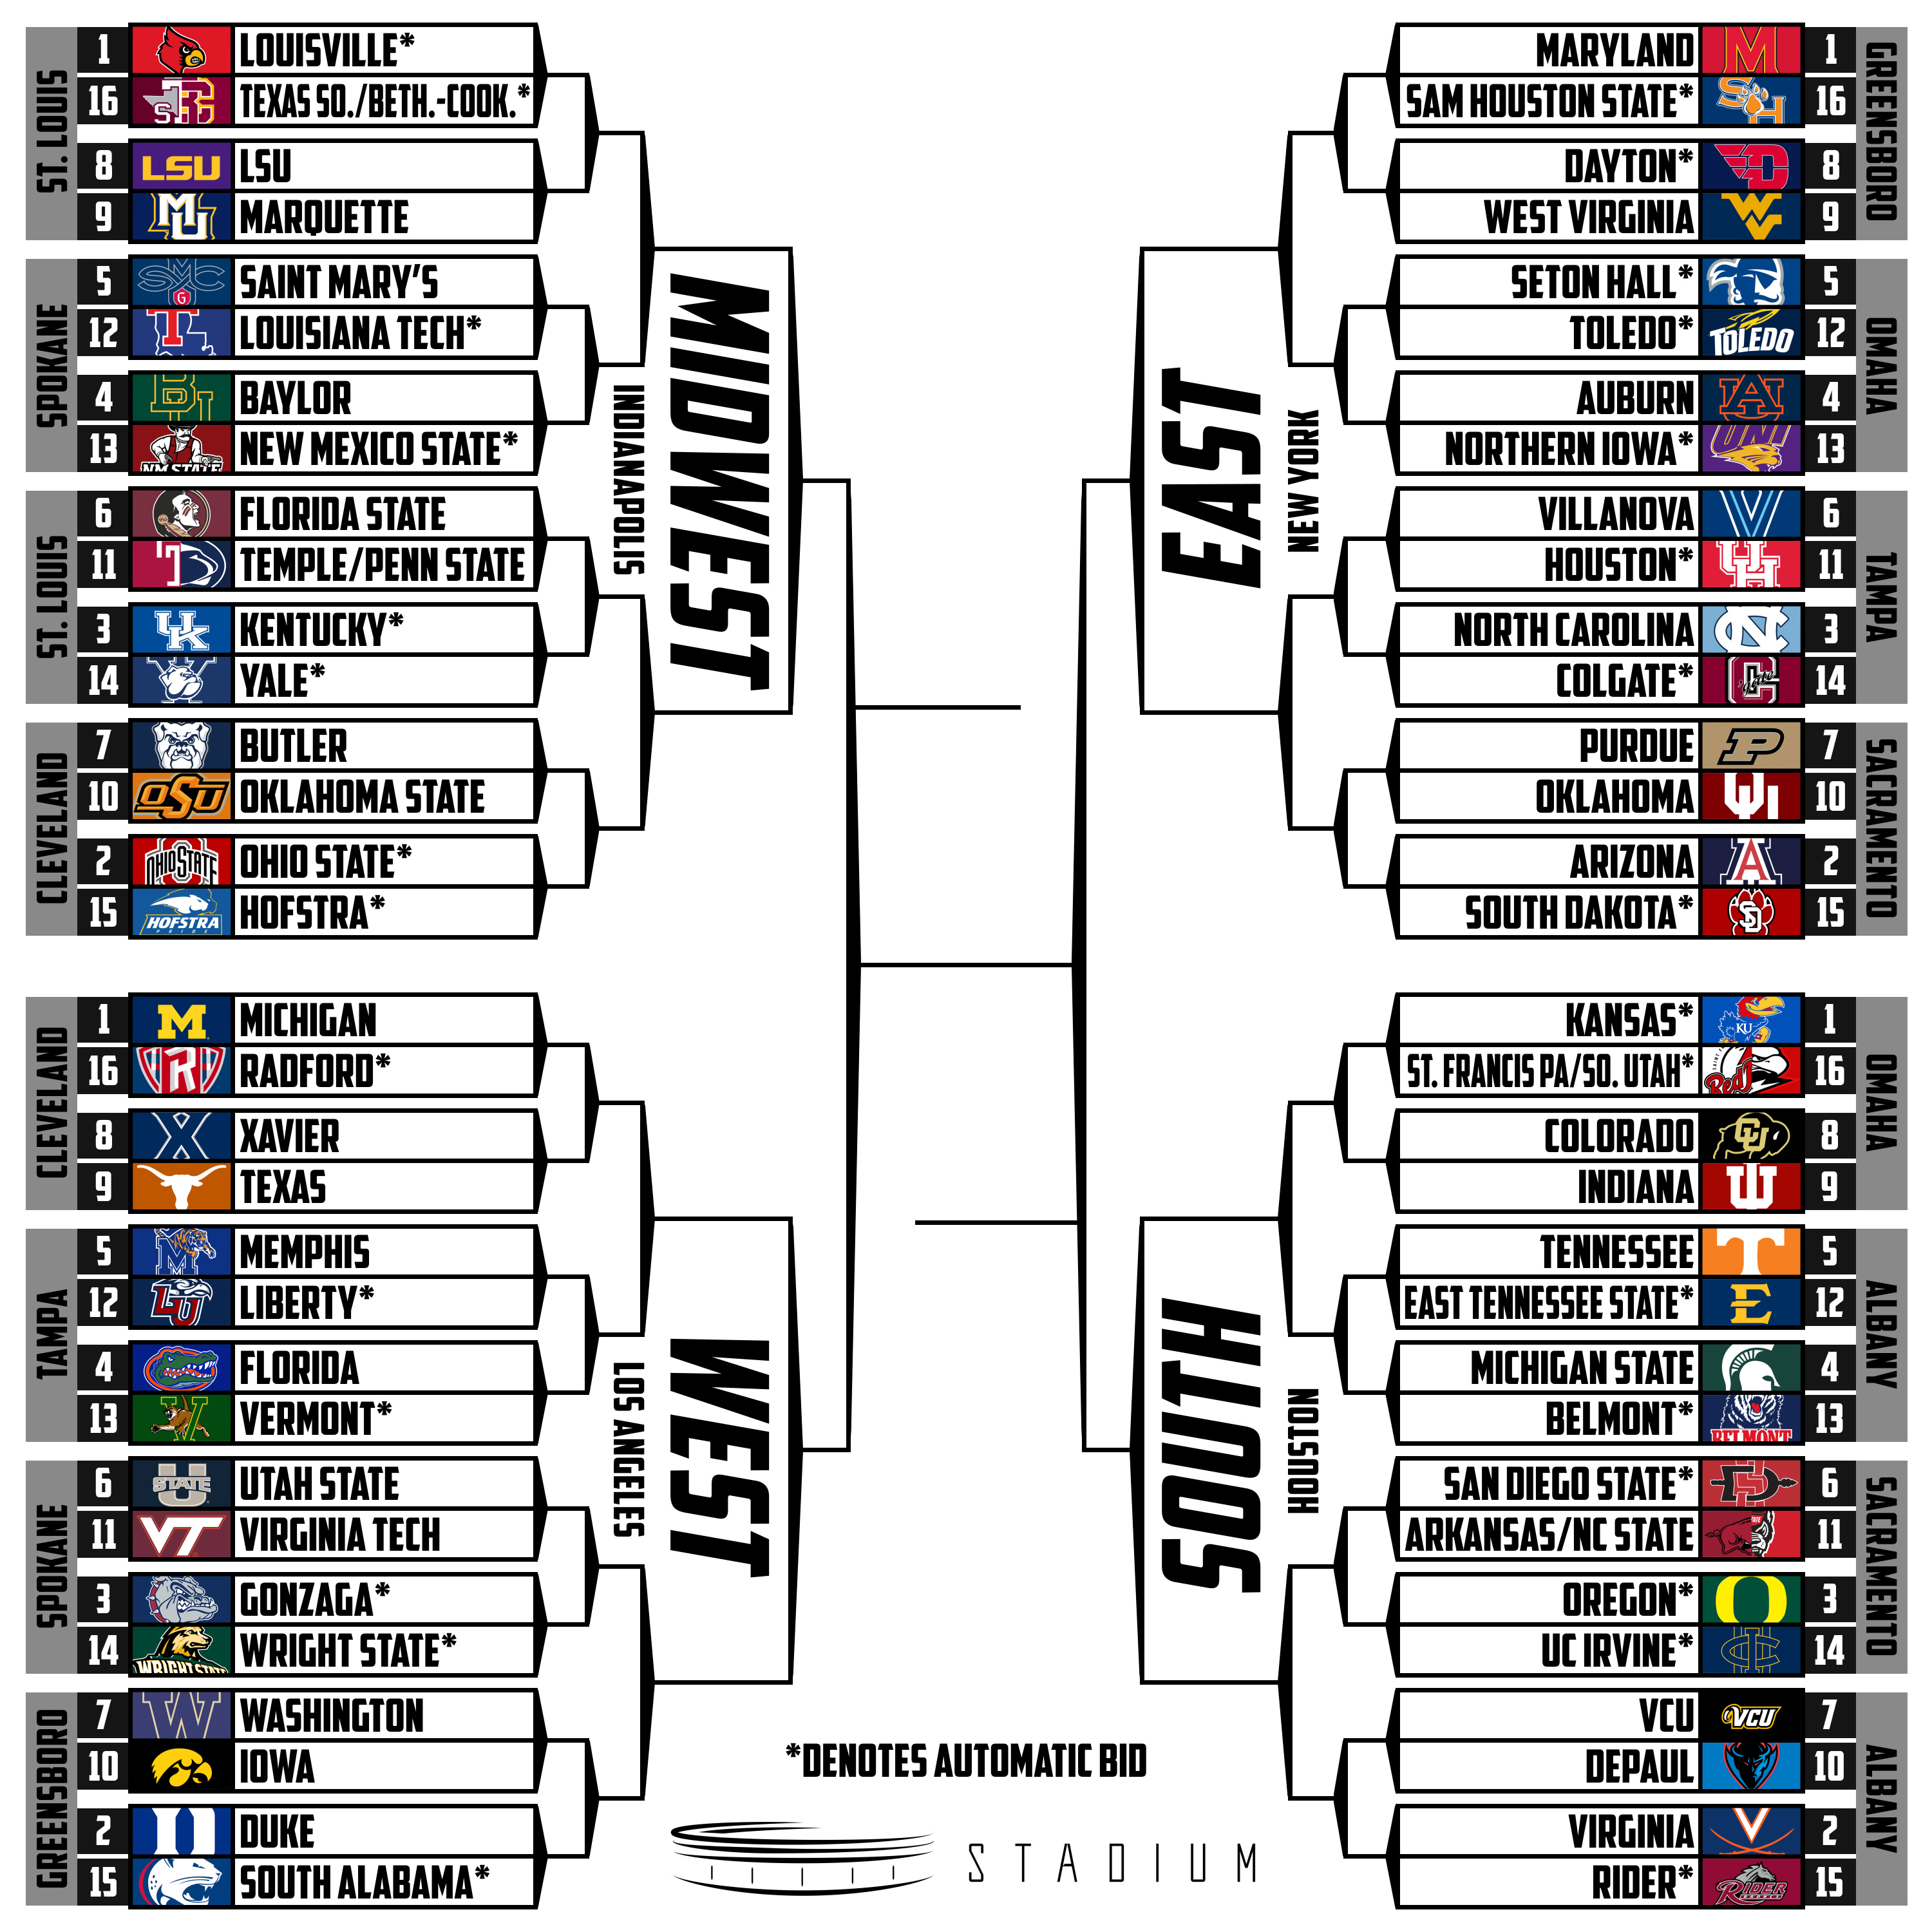 here-s-what-the-march-madness-bracket-could-look-like-at-the-end-of-the